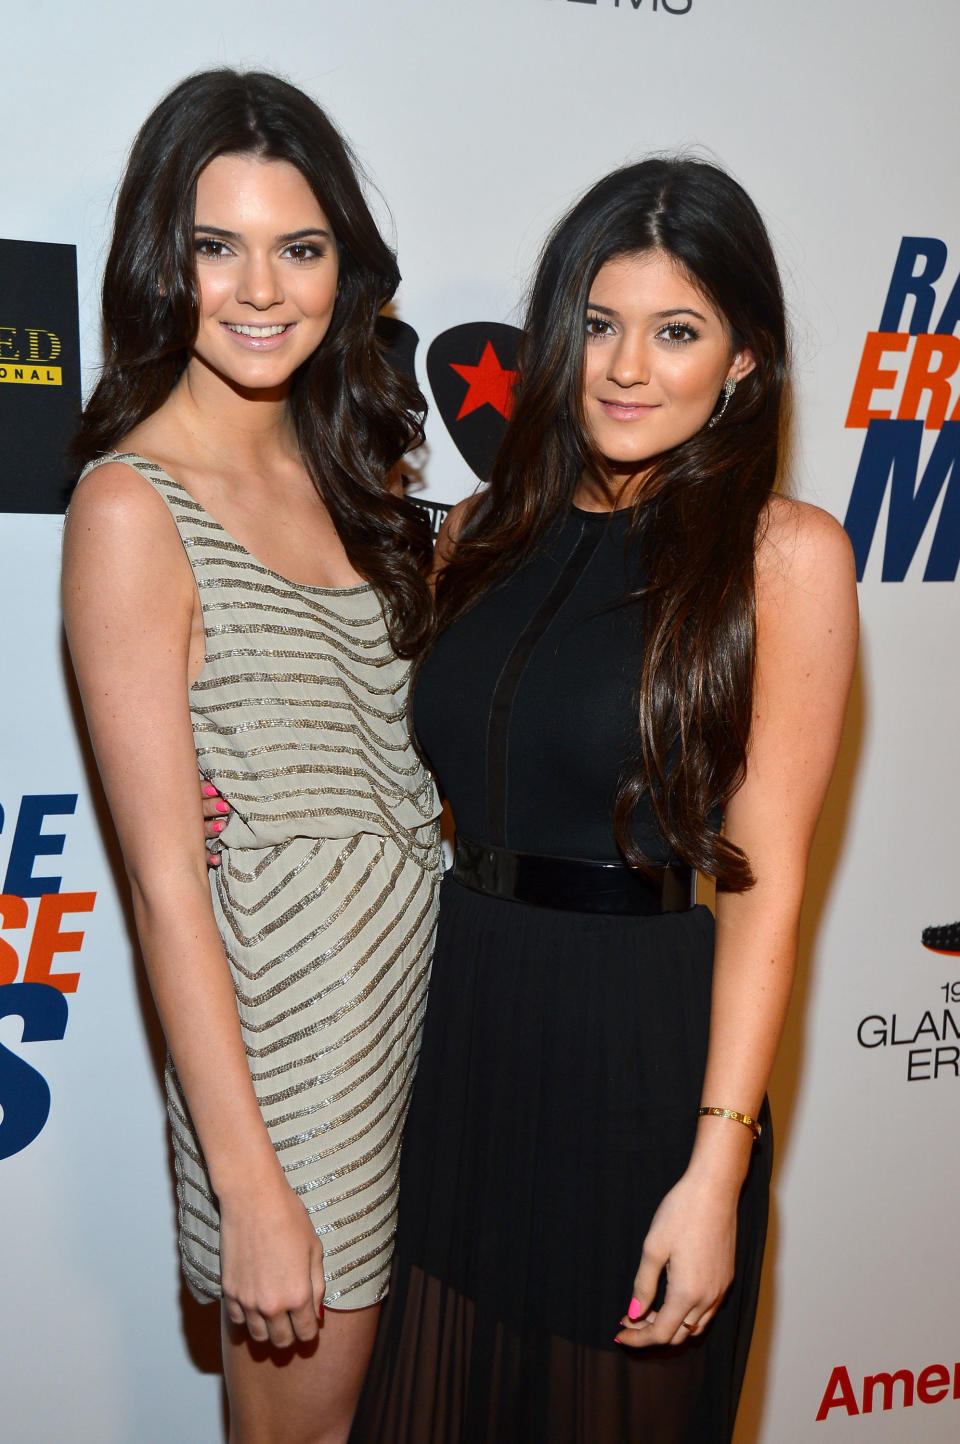 Kendall and Kylie Jenner arrive at the 19th Annual Race to Erase MS held at the Hyatt Regency Century Plaza on May 18, 2012 in Century City, California.